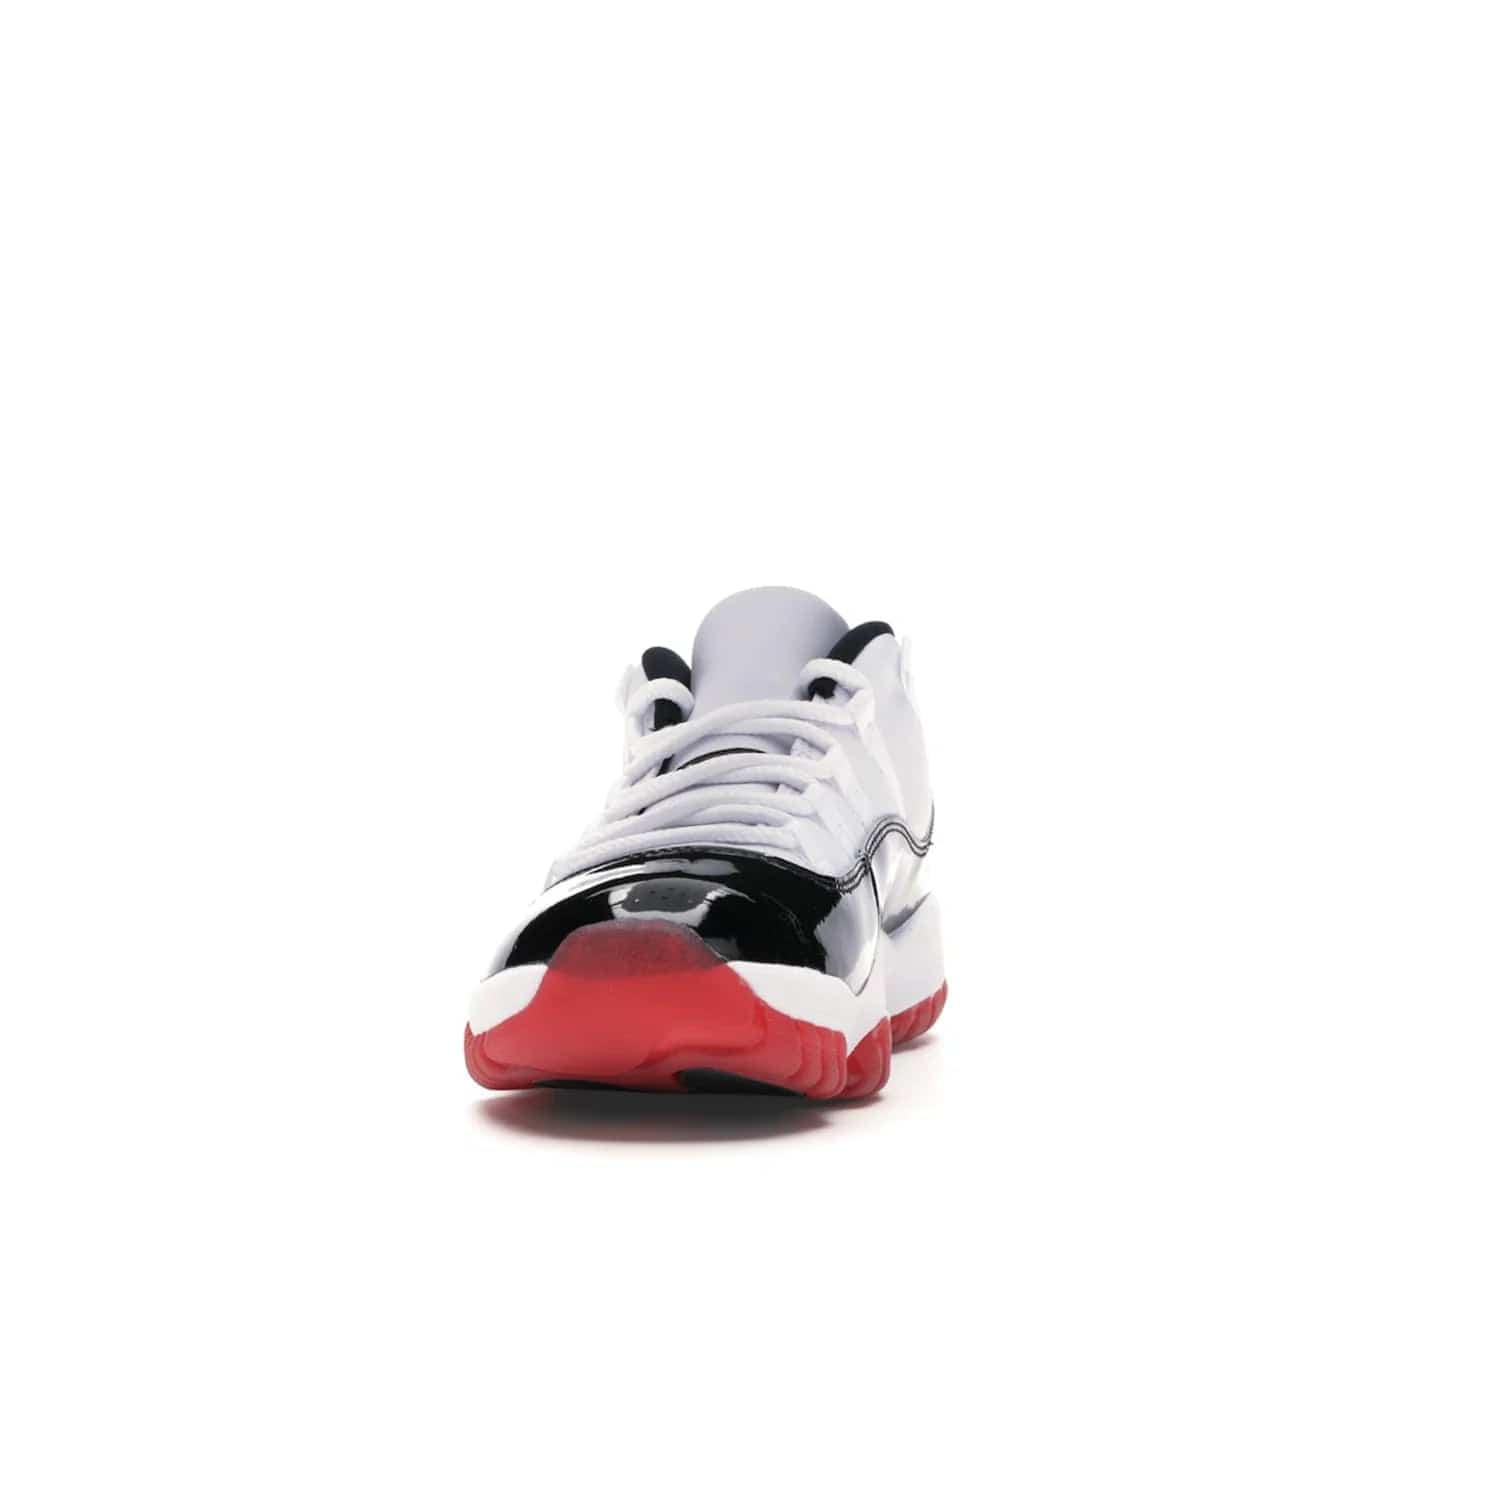 Jordan 11 Retro Low Concord Bred - Image 11 - Only at www.BallersClubKickz.com - Grab the classic Jordan 11 look with the Jordan 11 Retro Low Concord Bred. With white and black elements and the iconic red outsole of the Jordan 11 Bred, you won't miss a beat. Released in June 2020, the perfect complement to any outfit.